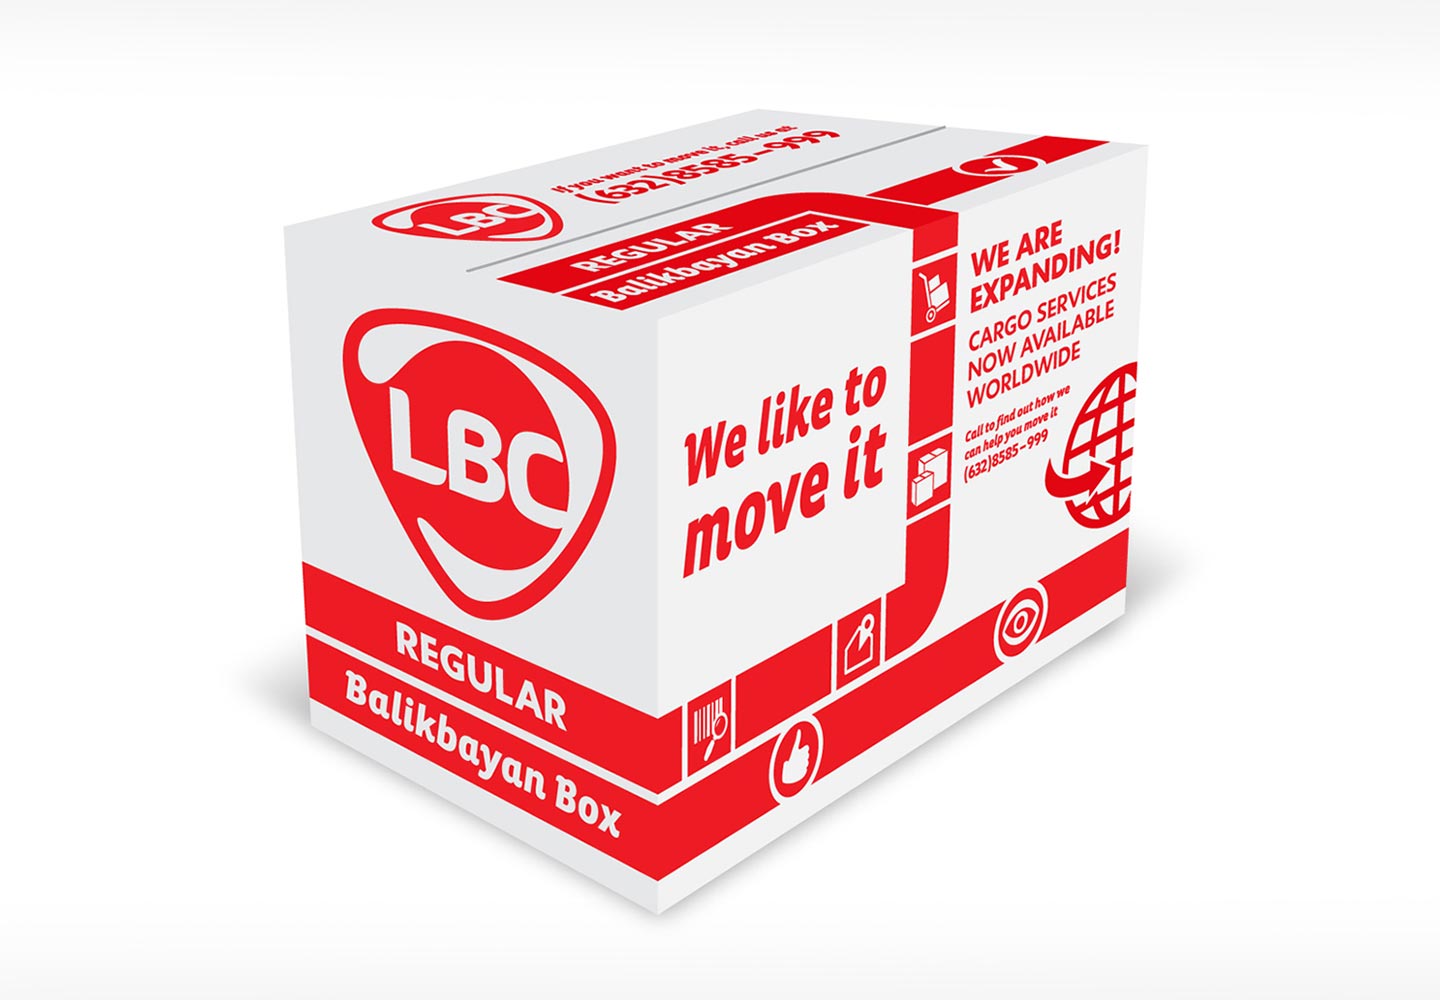 Brand Consultancy in Logistics Industry. Packaging design for LBC.